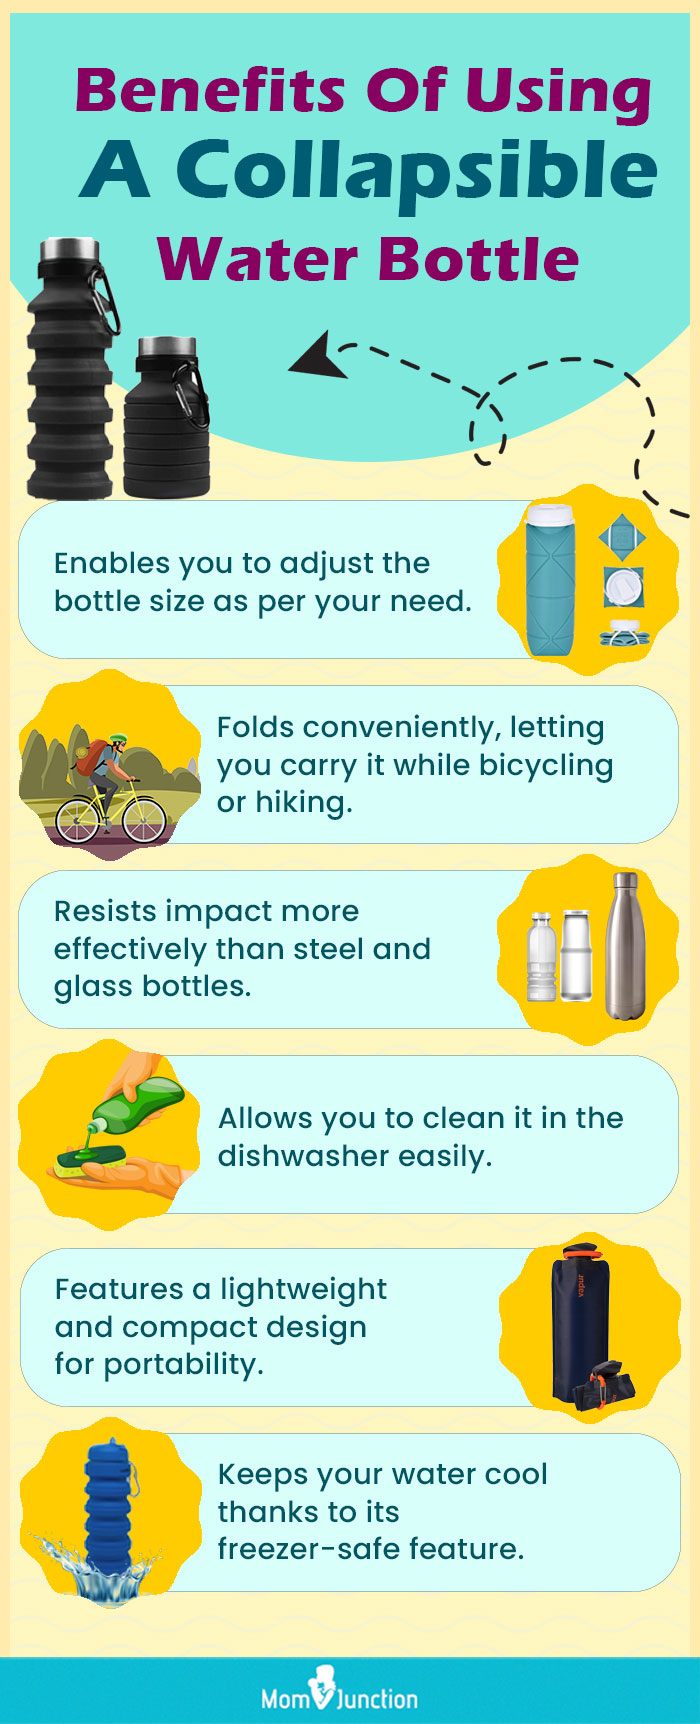 Benefits Of Using A Collapsible Water Bottle (infographic)